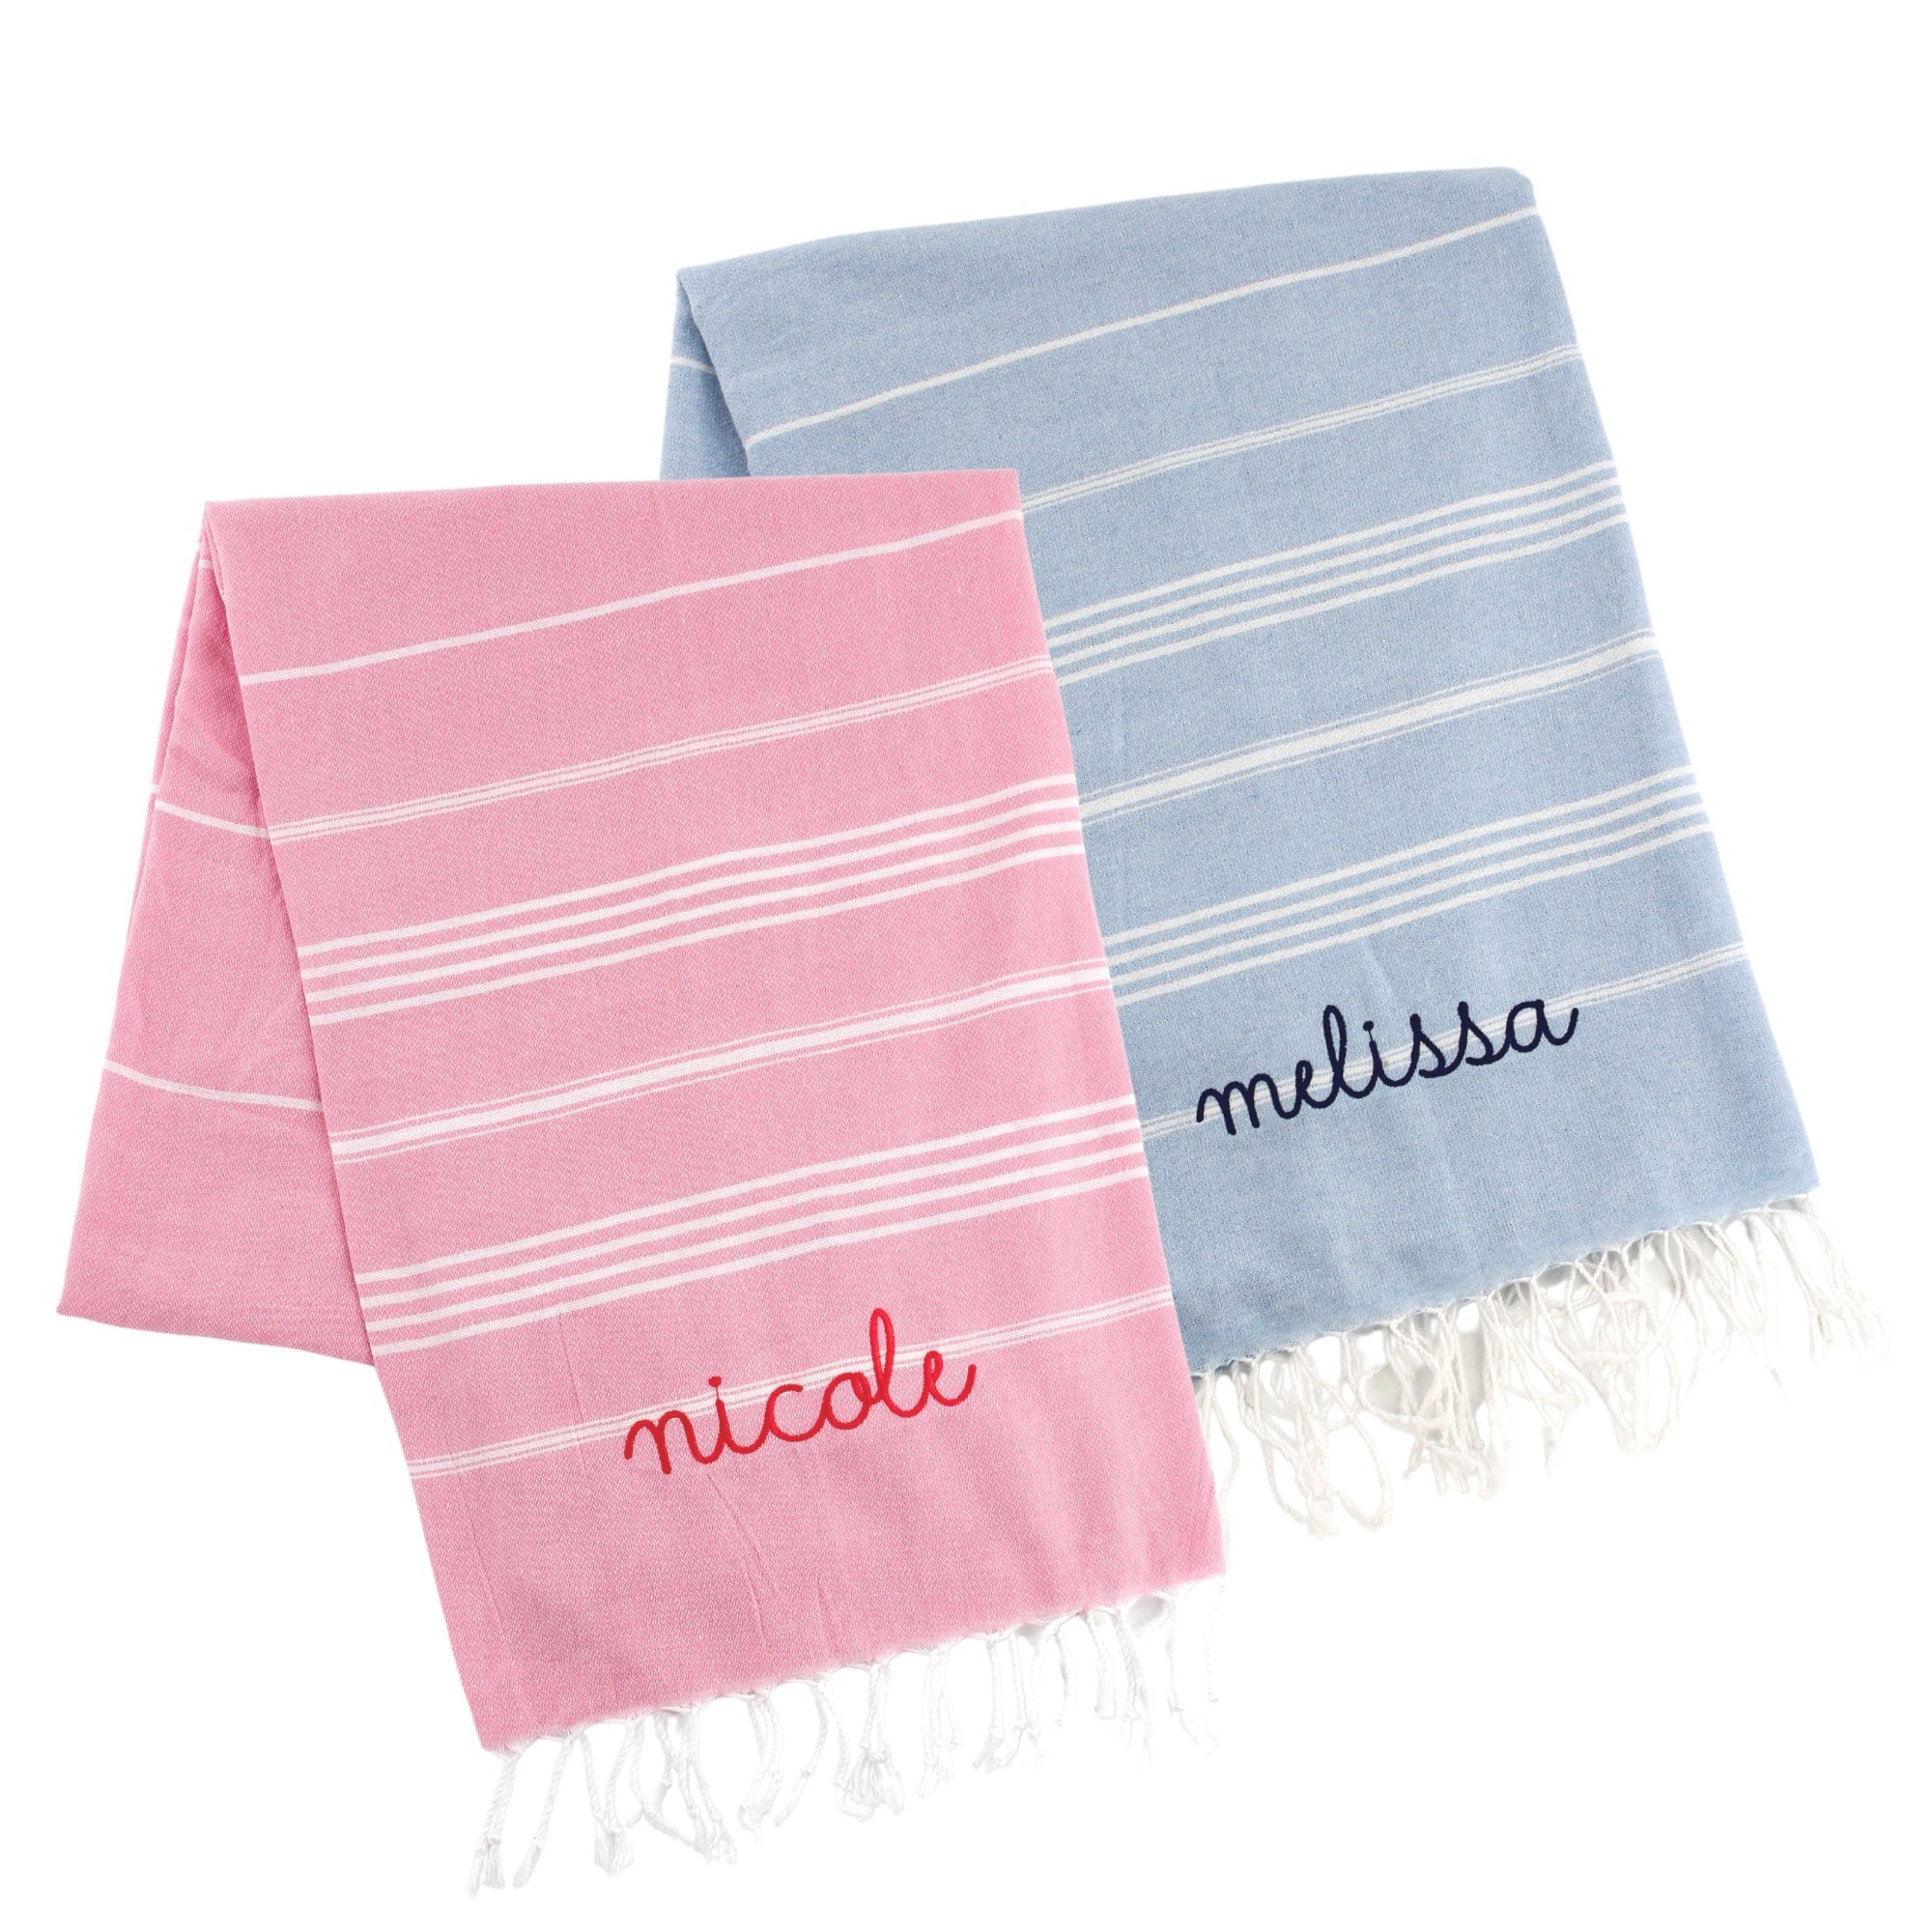 Turkish Towel, Embroidered - Sprinkled With Pink #bachelorette #custom #gifts